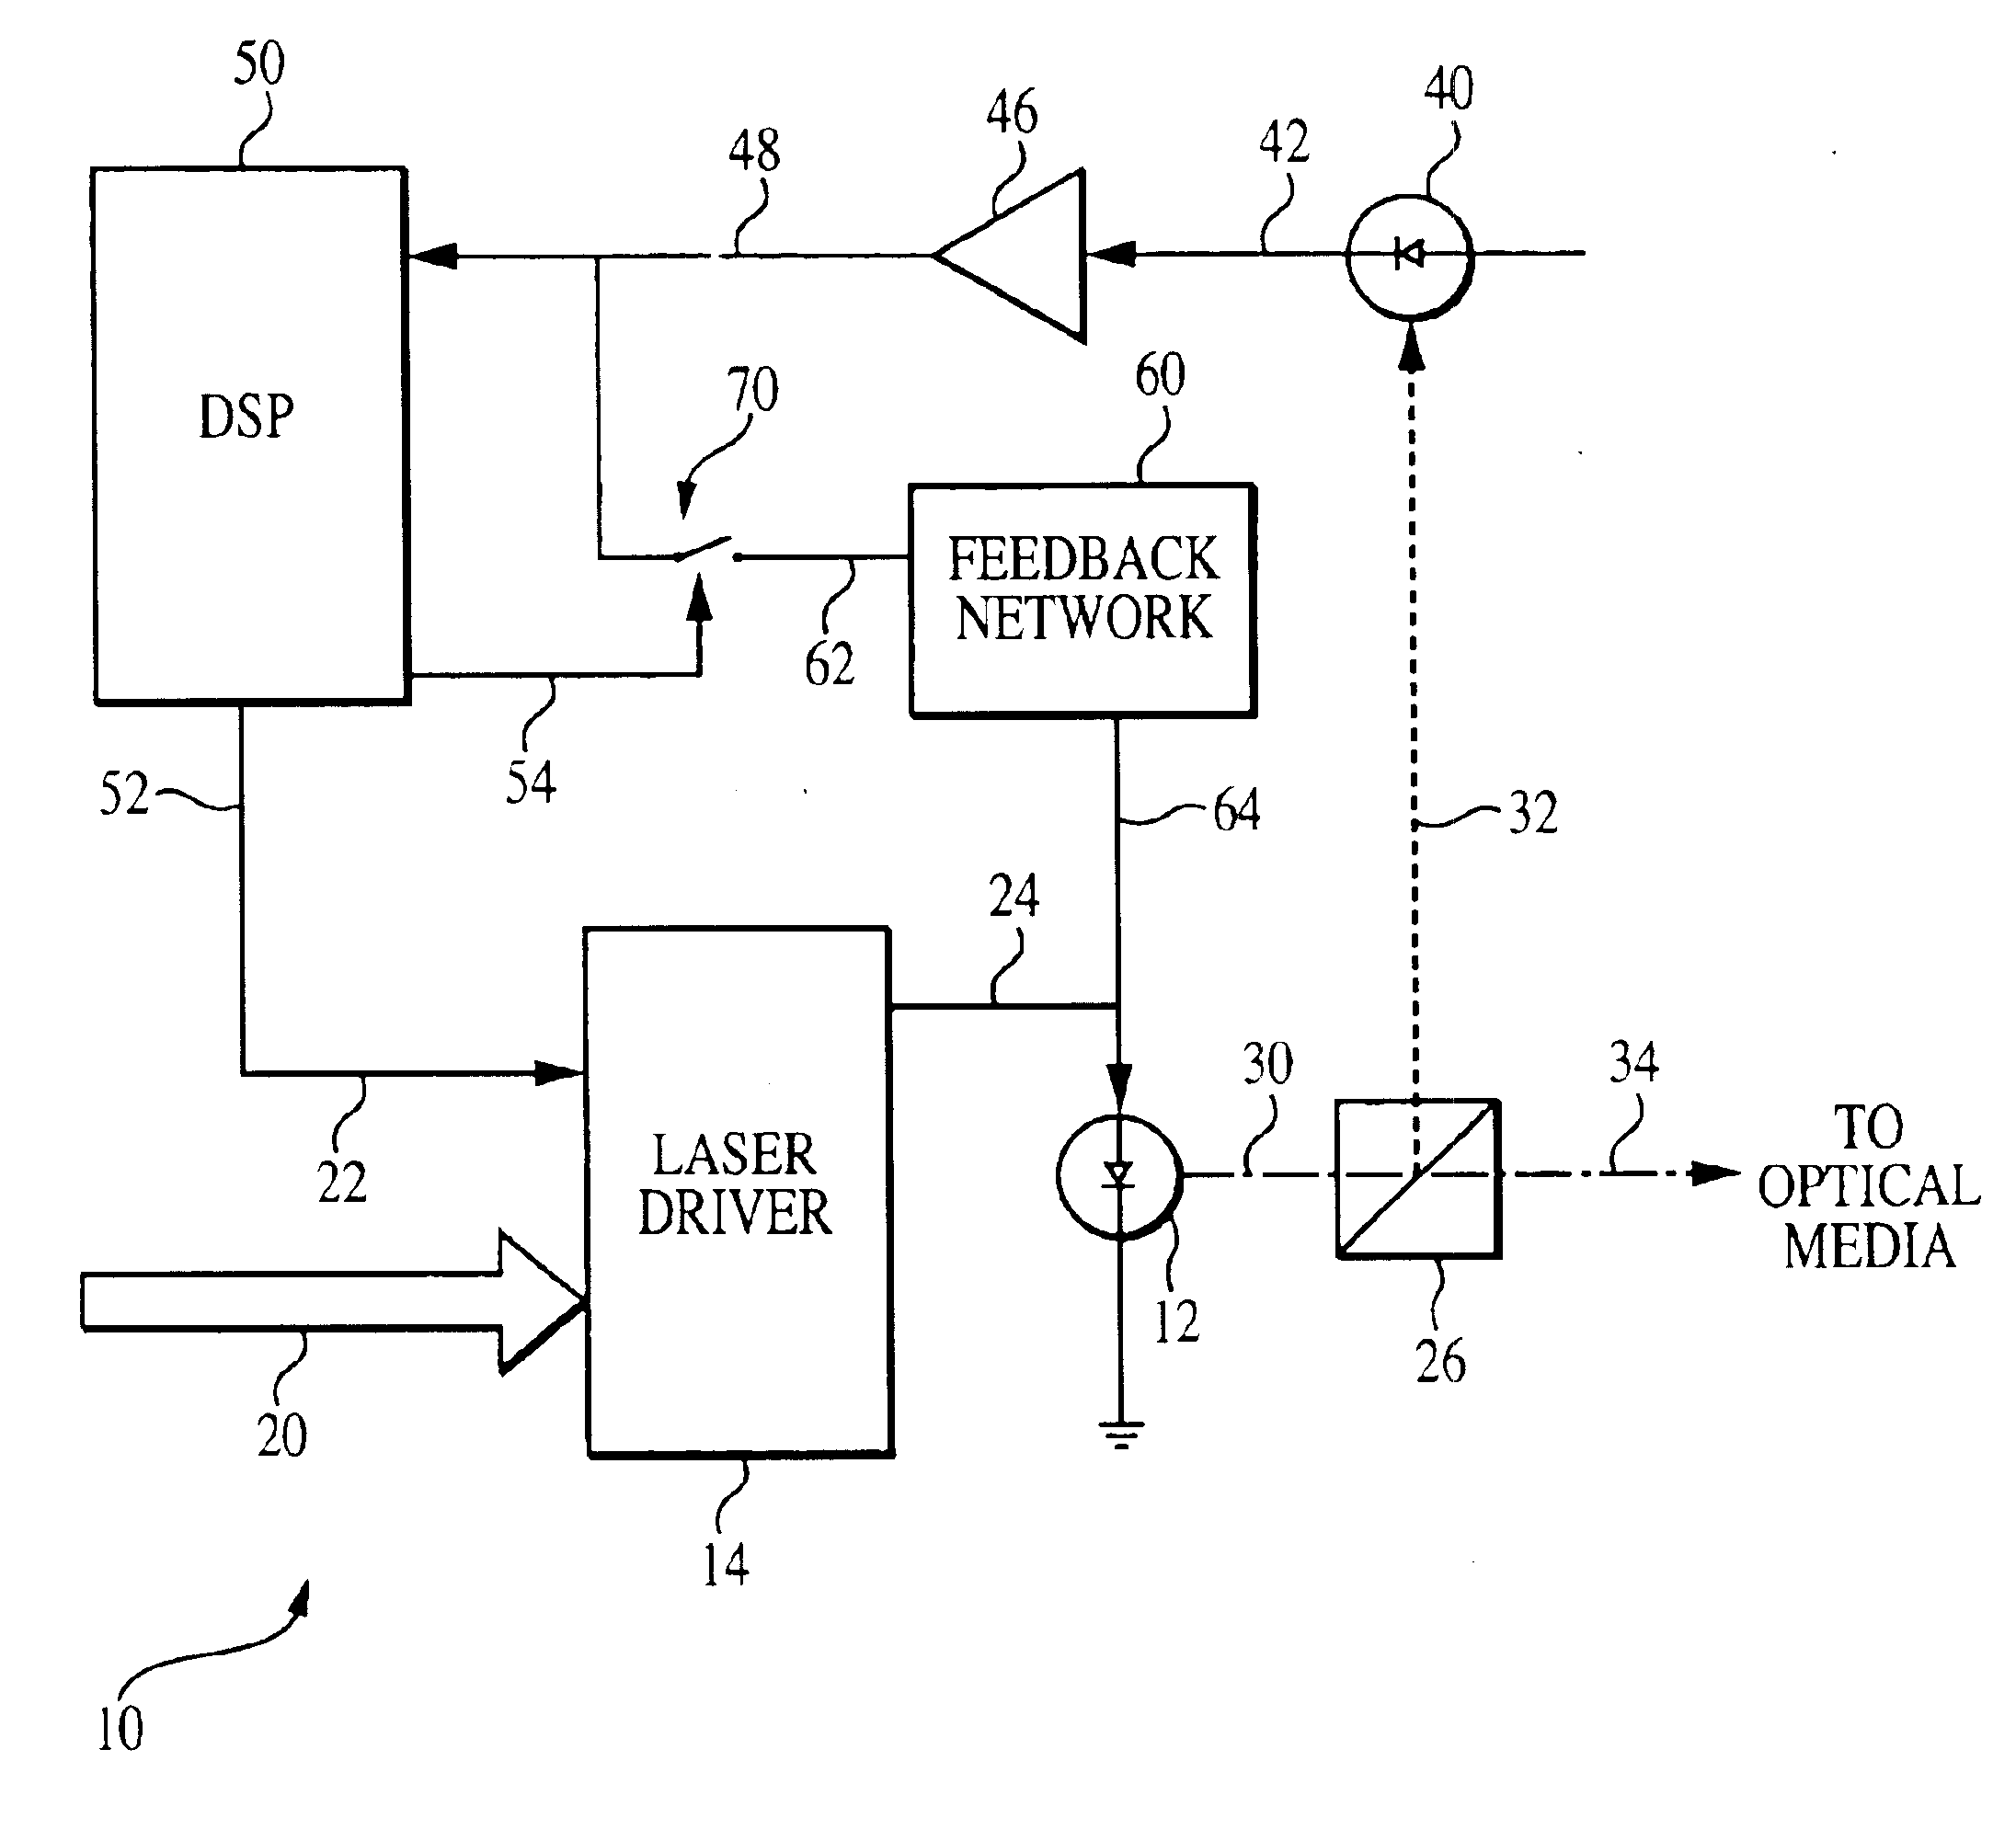 Laser driver with noise reduction feedback for optical storage applications